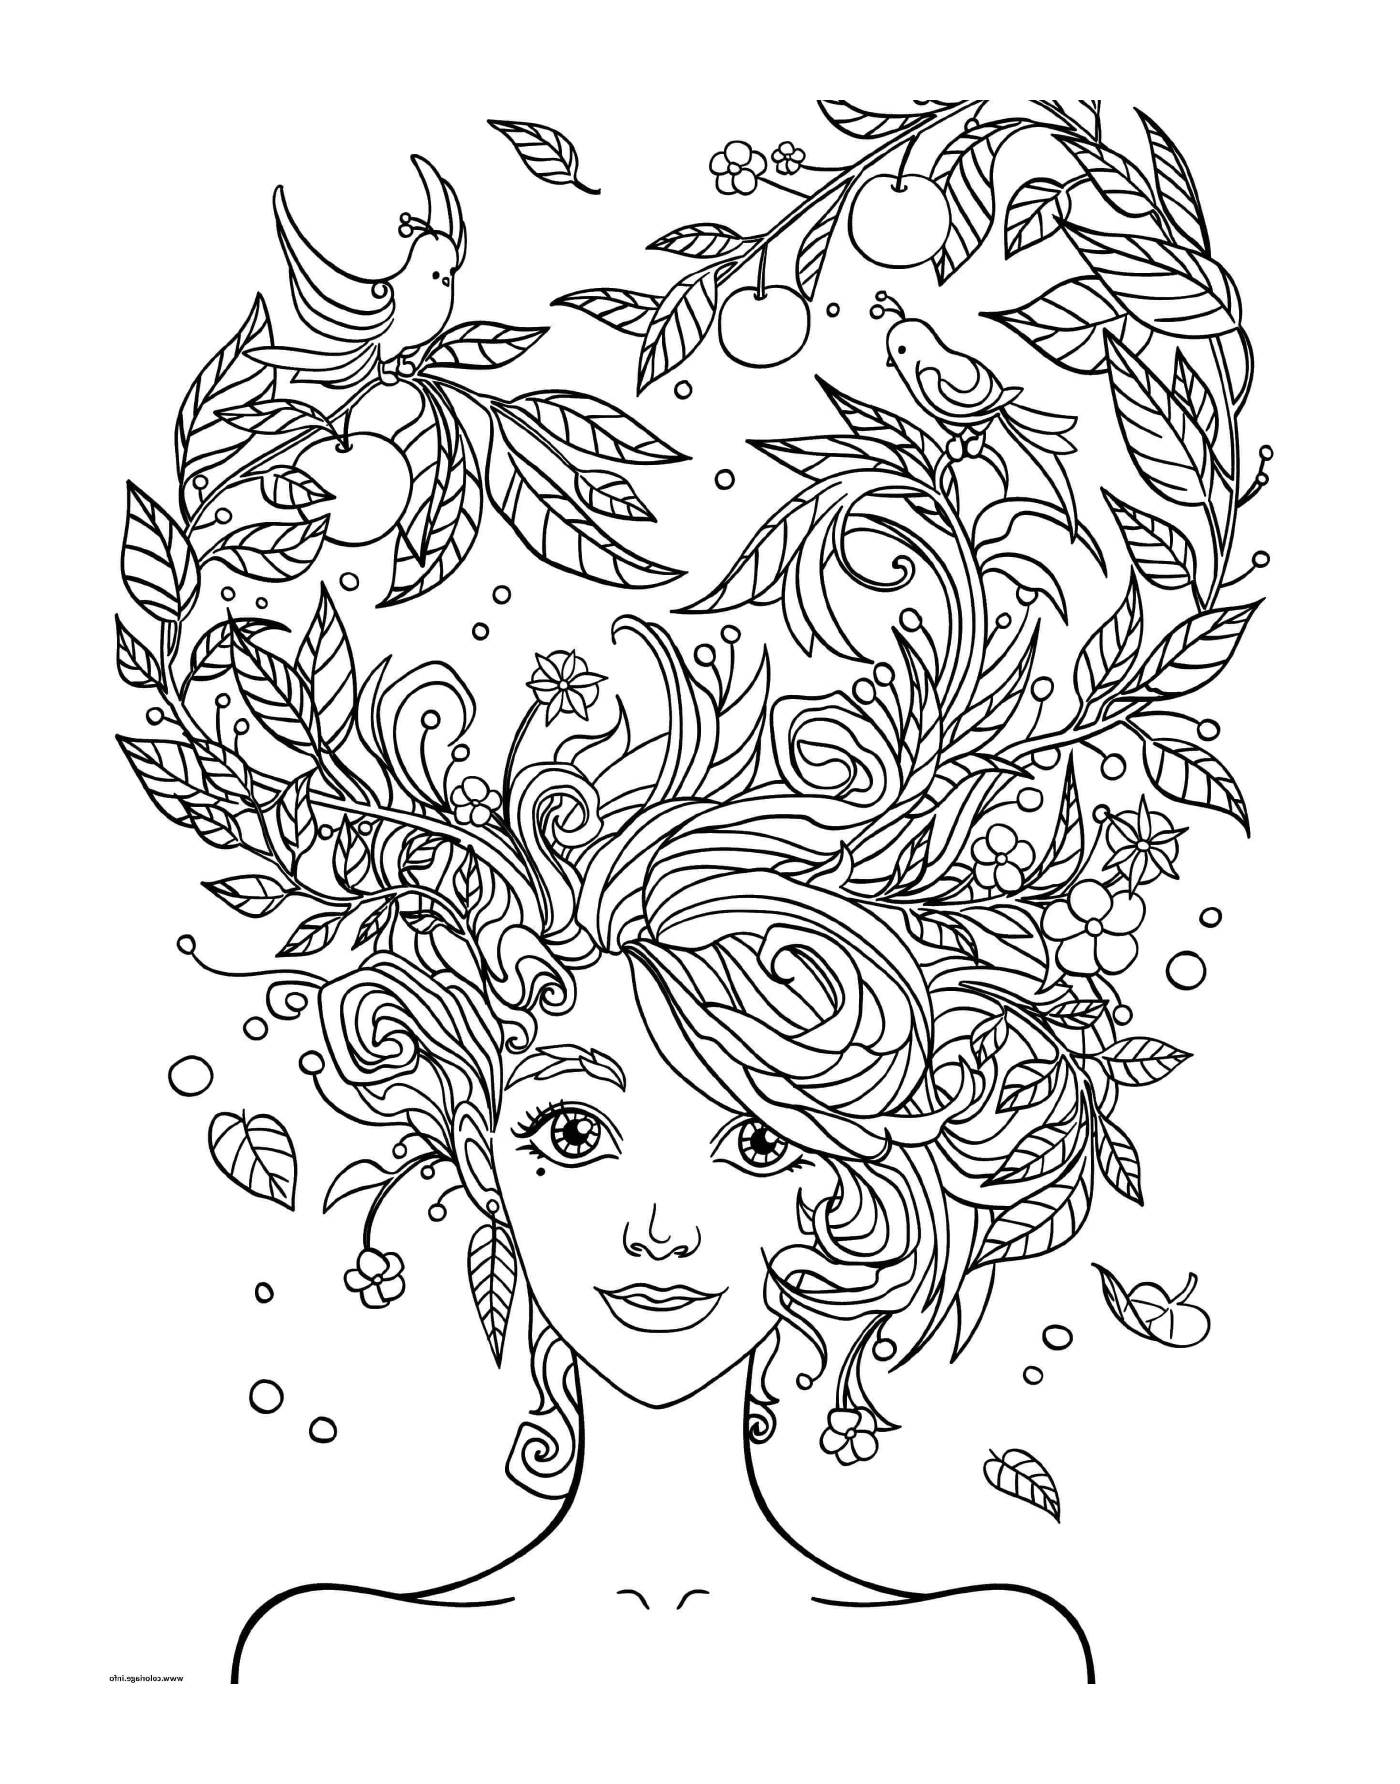  Adult woman's head with flowers in the hair 